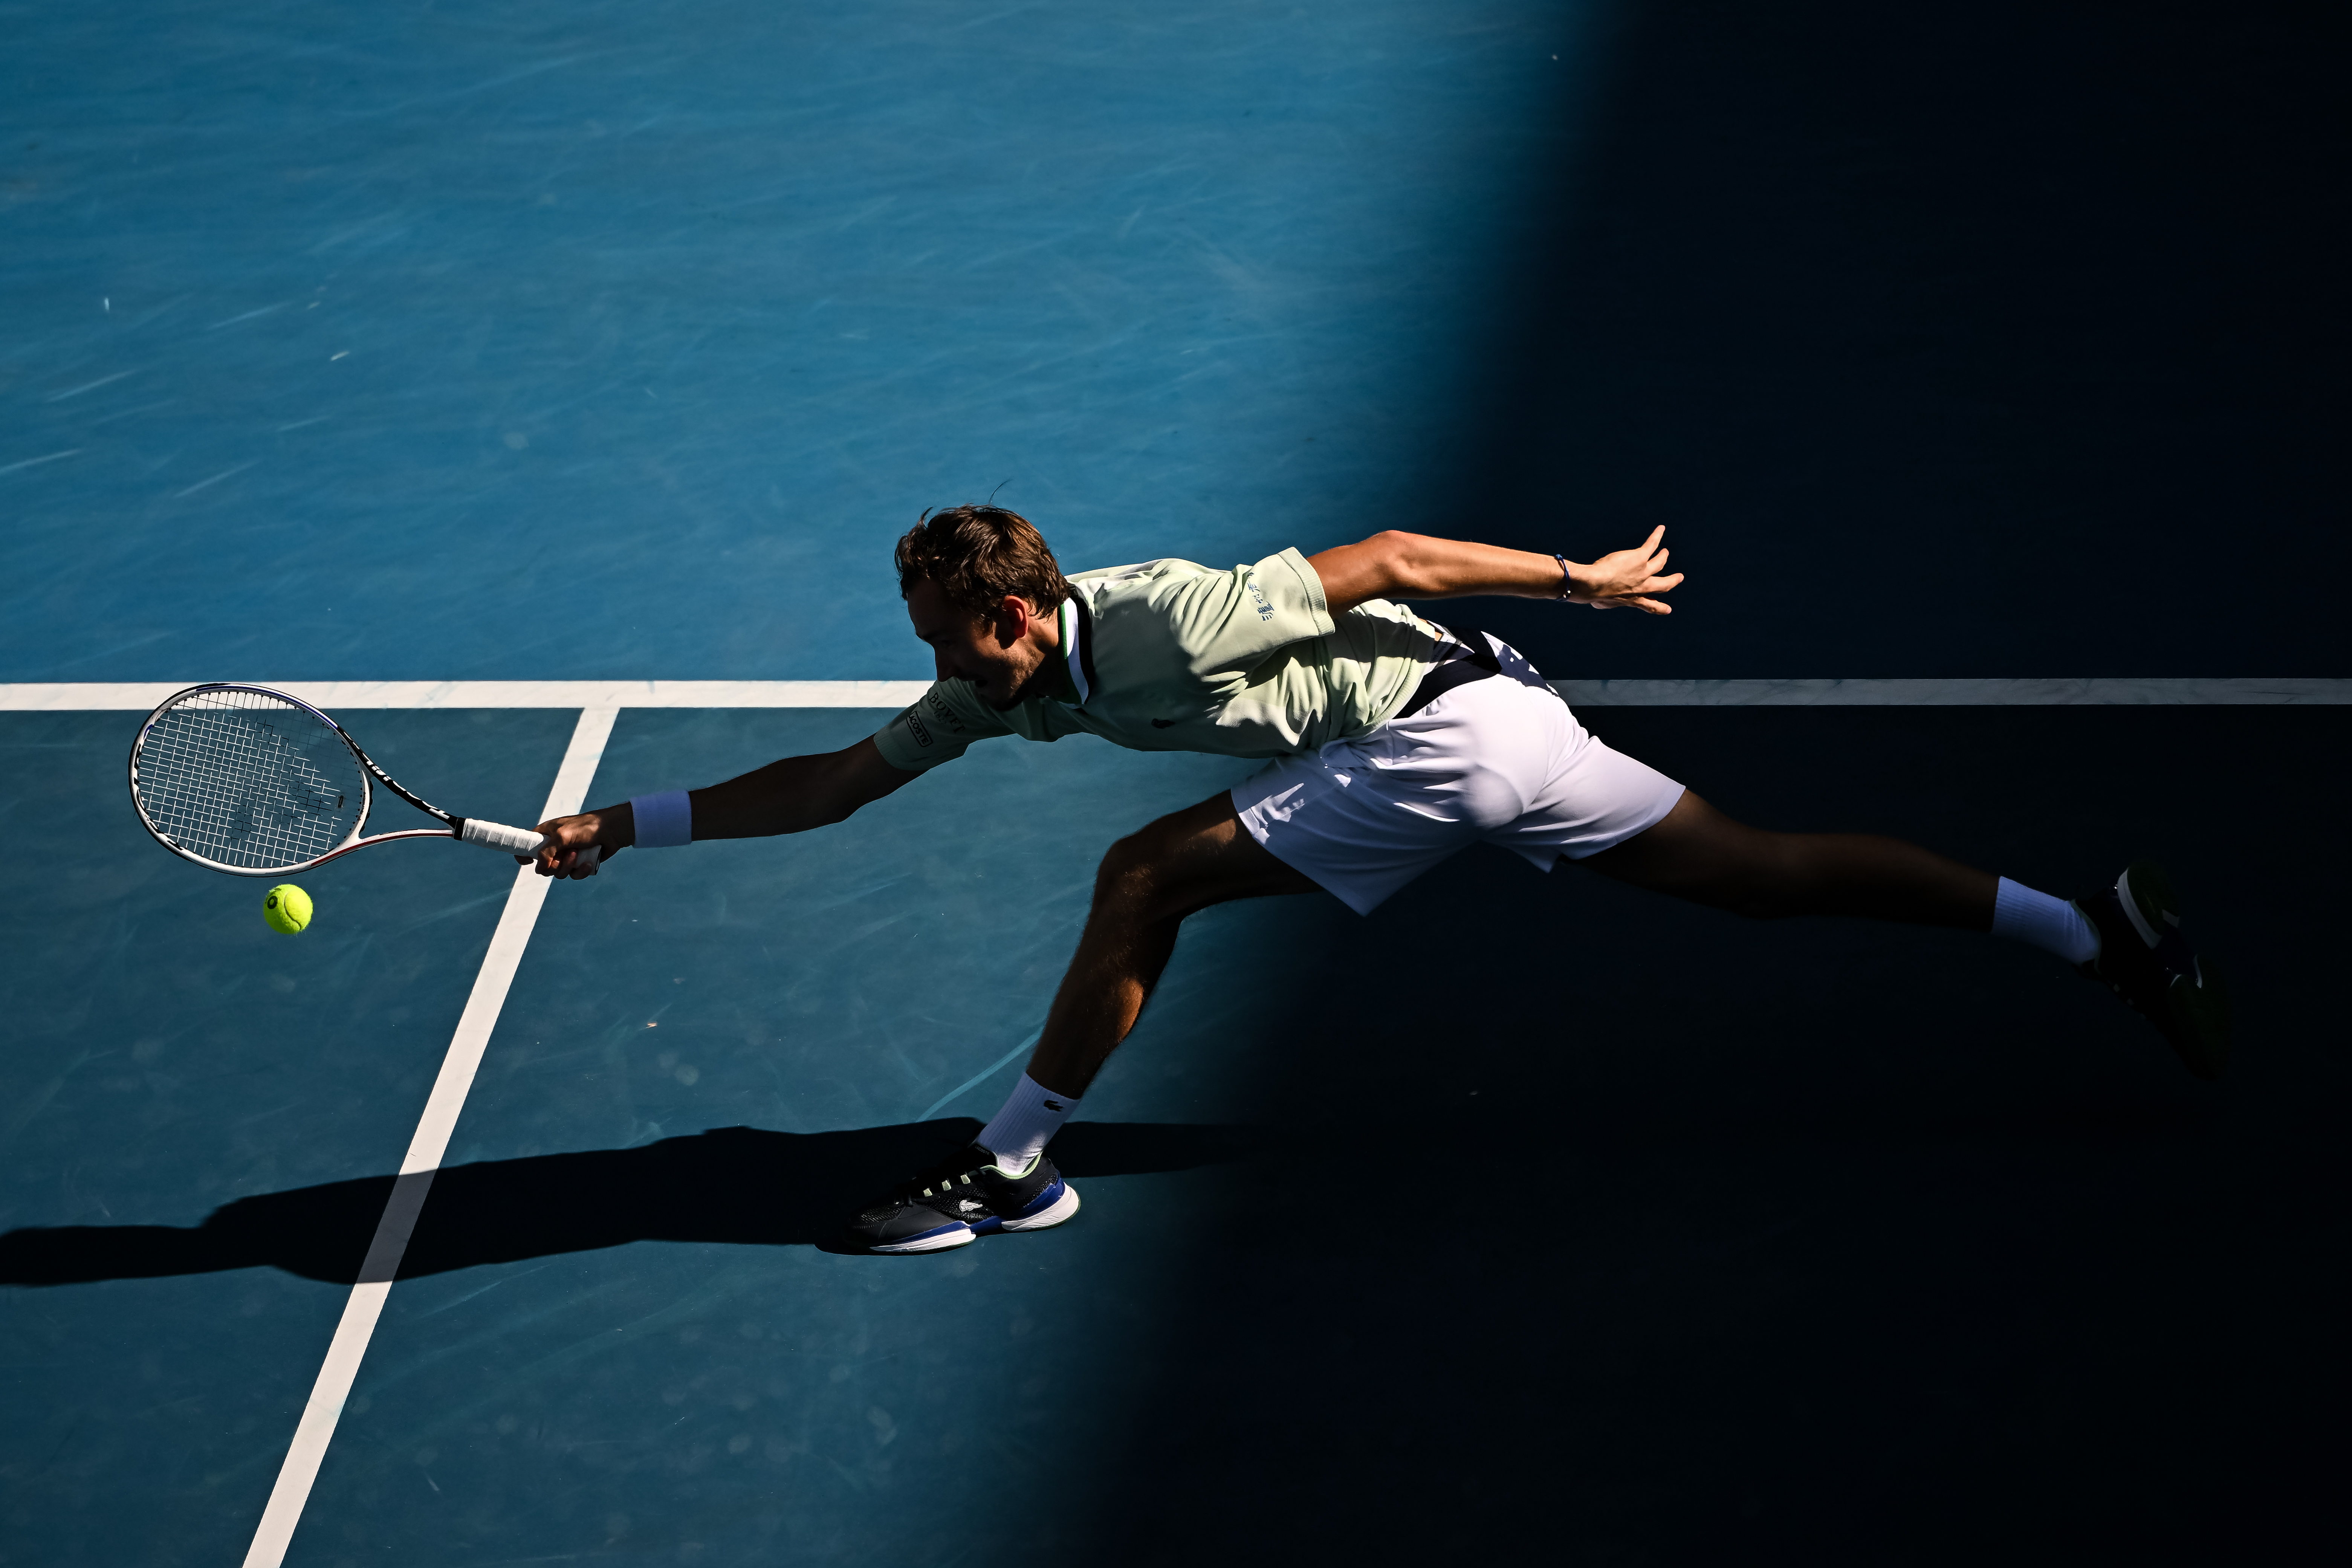 Daniil Medvedev of Russia hits a forehand against Maxime Cressy of the United States during day eight of the 2022 Australian Open at Melbourne Park on January 24, 2022 in Melbourne, Australia.